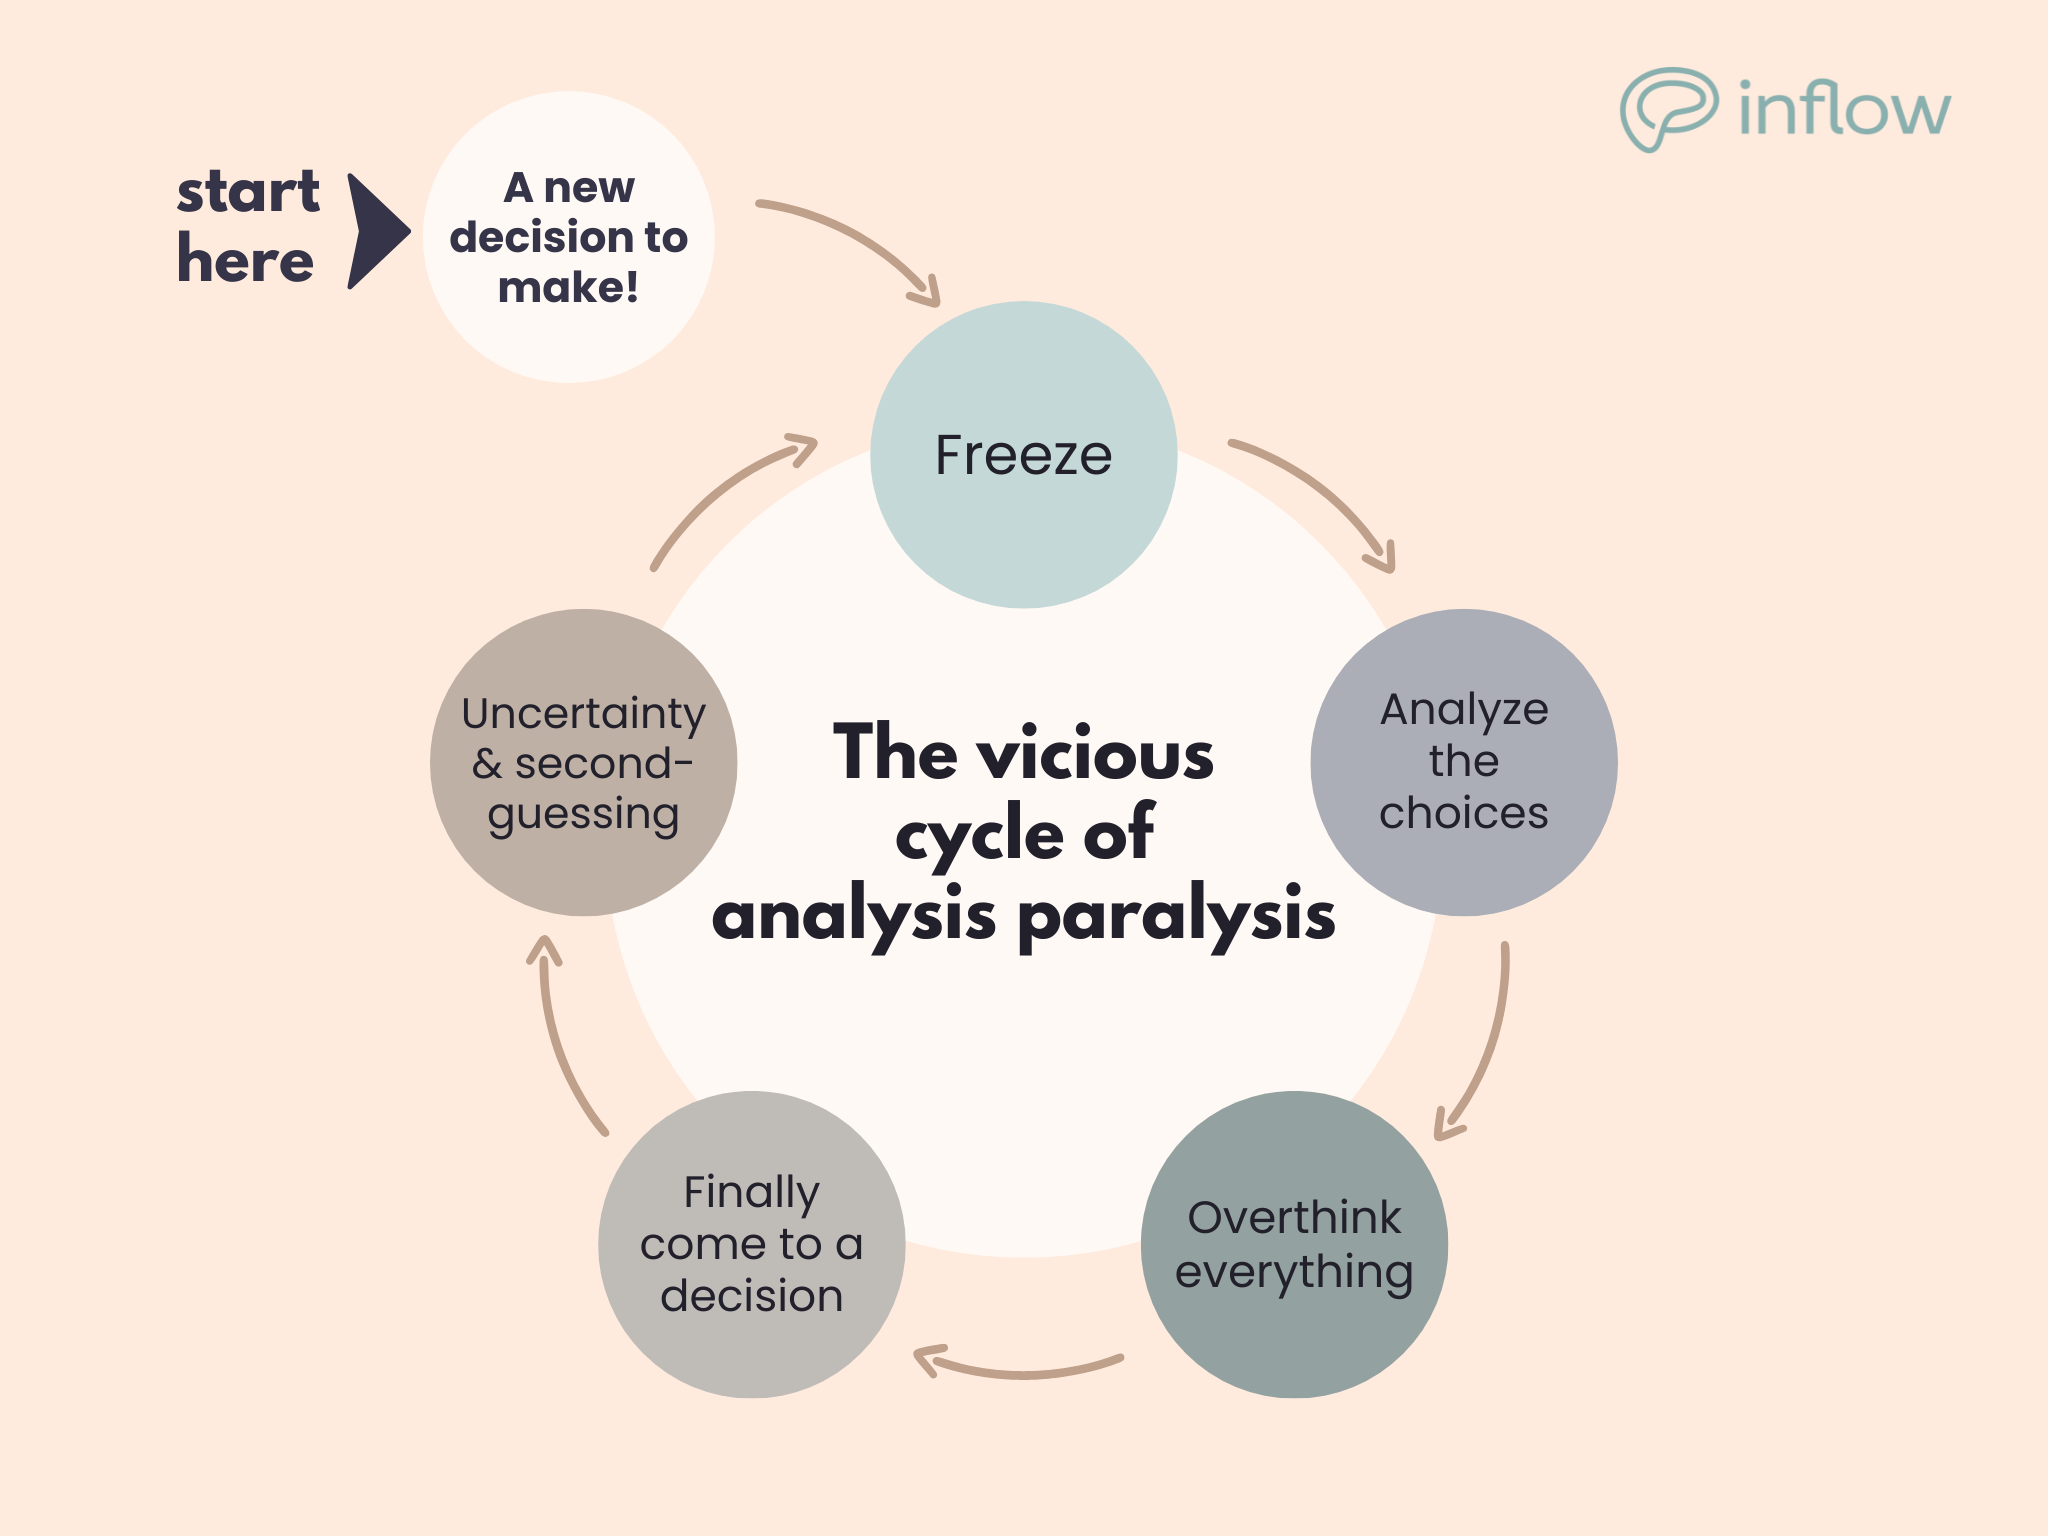 the vicious cycle of analysis paralysis. start here, a new decision to make! next, freeze, analyze the choices, overthink everything, finally come to a decision, uncertainty and second guessing, and back to freeze